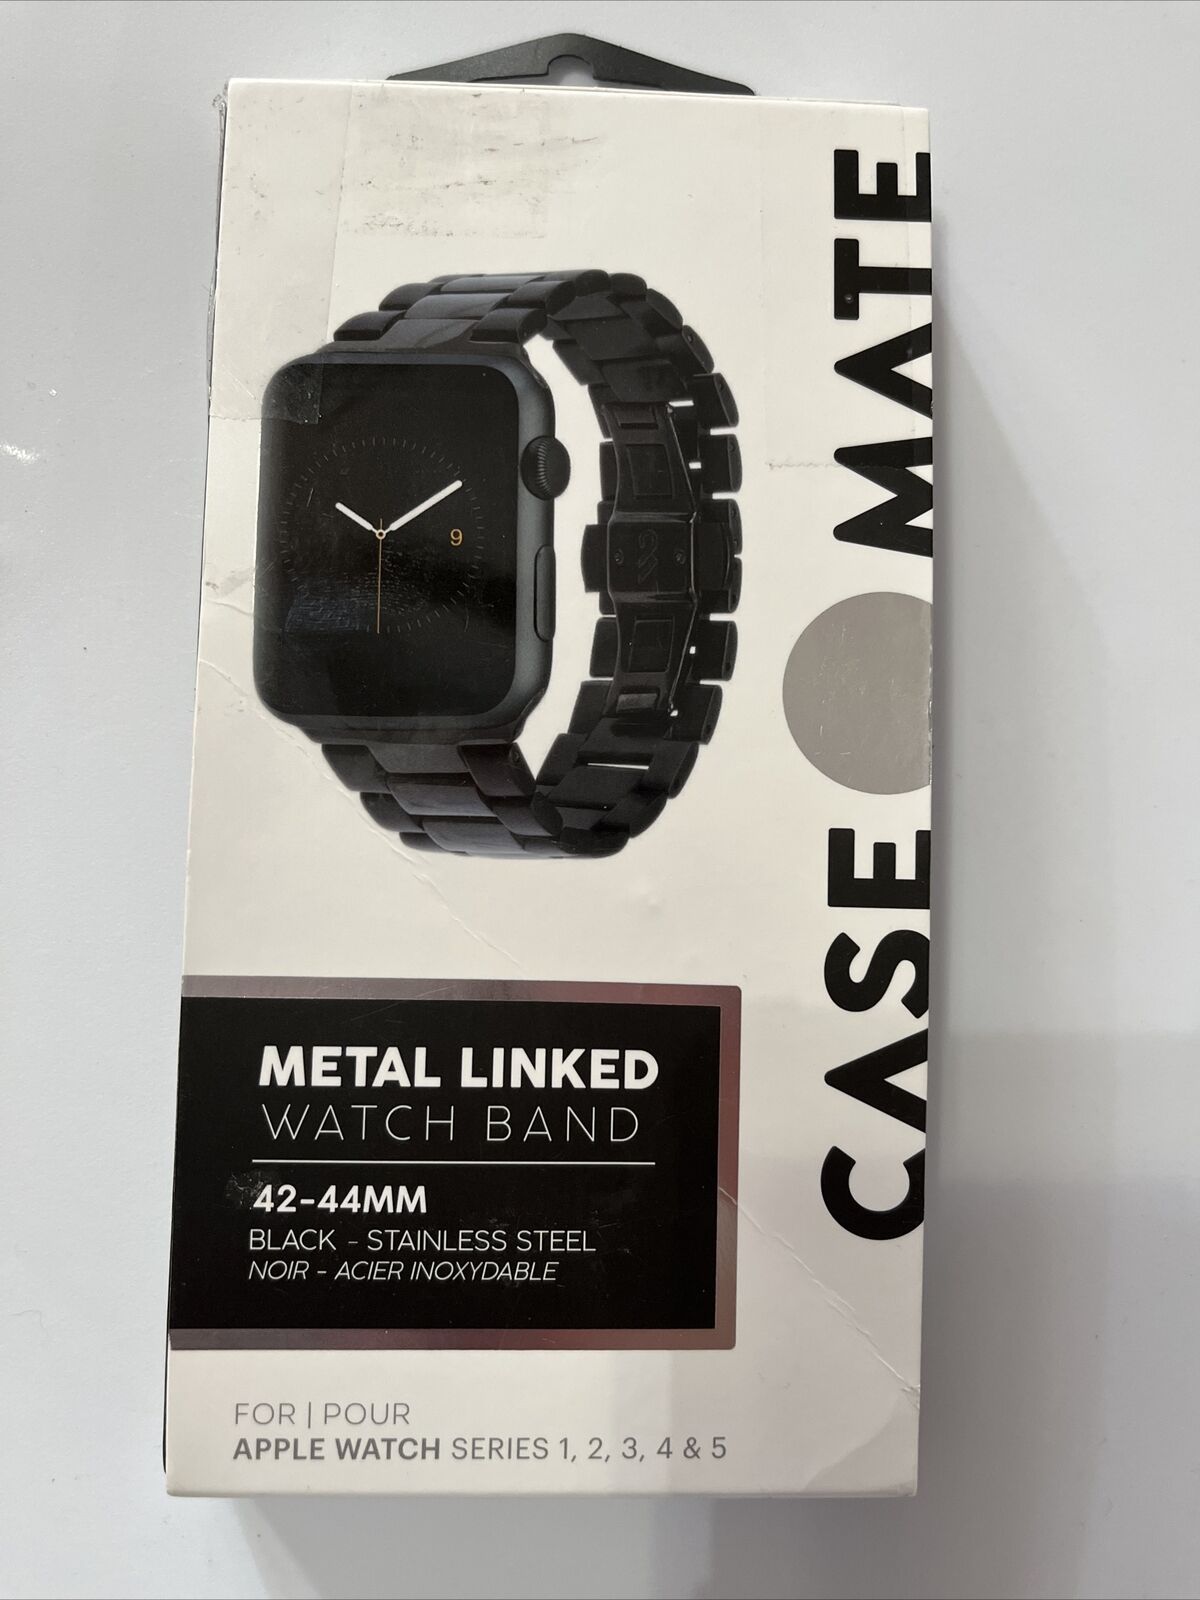 Case-mate Metal Linked Band 42-44mm Stainless Steel Apple Watch Band Black New